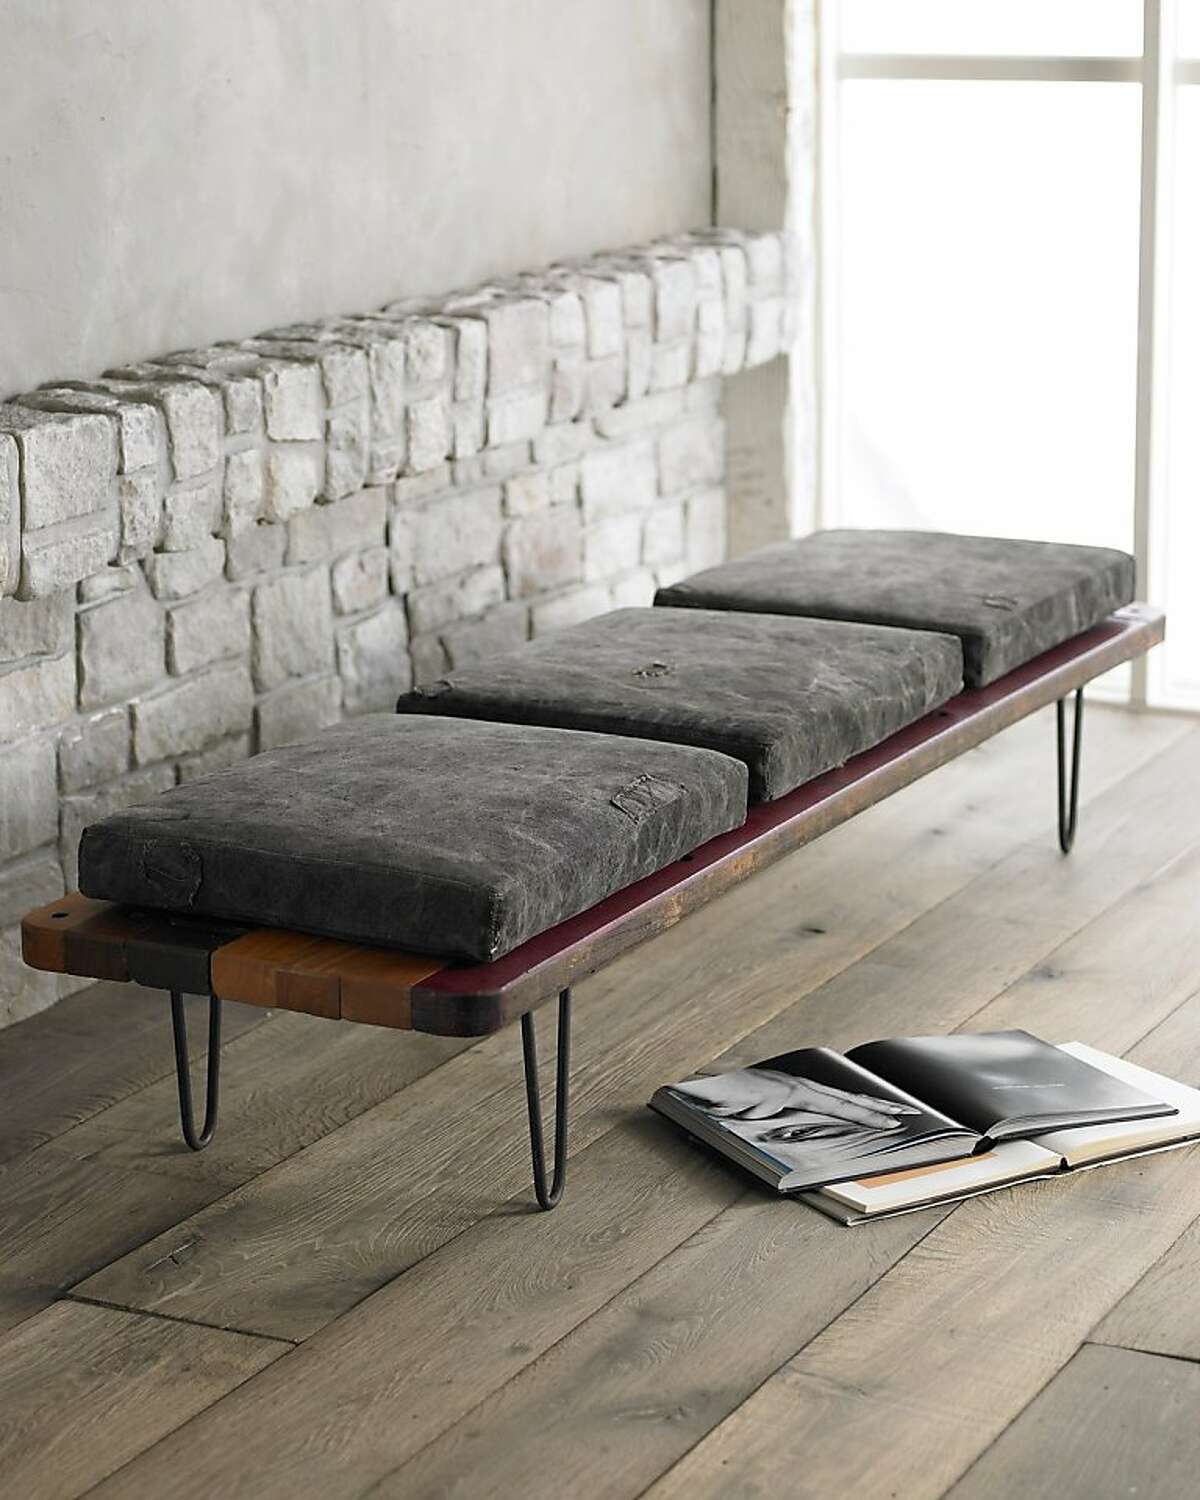 Bench is handcrafted of reclaimed South American hardwoods with natural wax and black finish. Cushions are covered with canvas and may be embellished with letters and patches with different colored stitching.